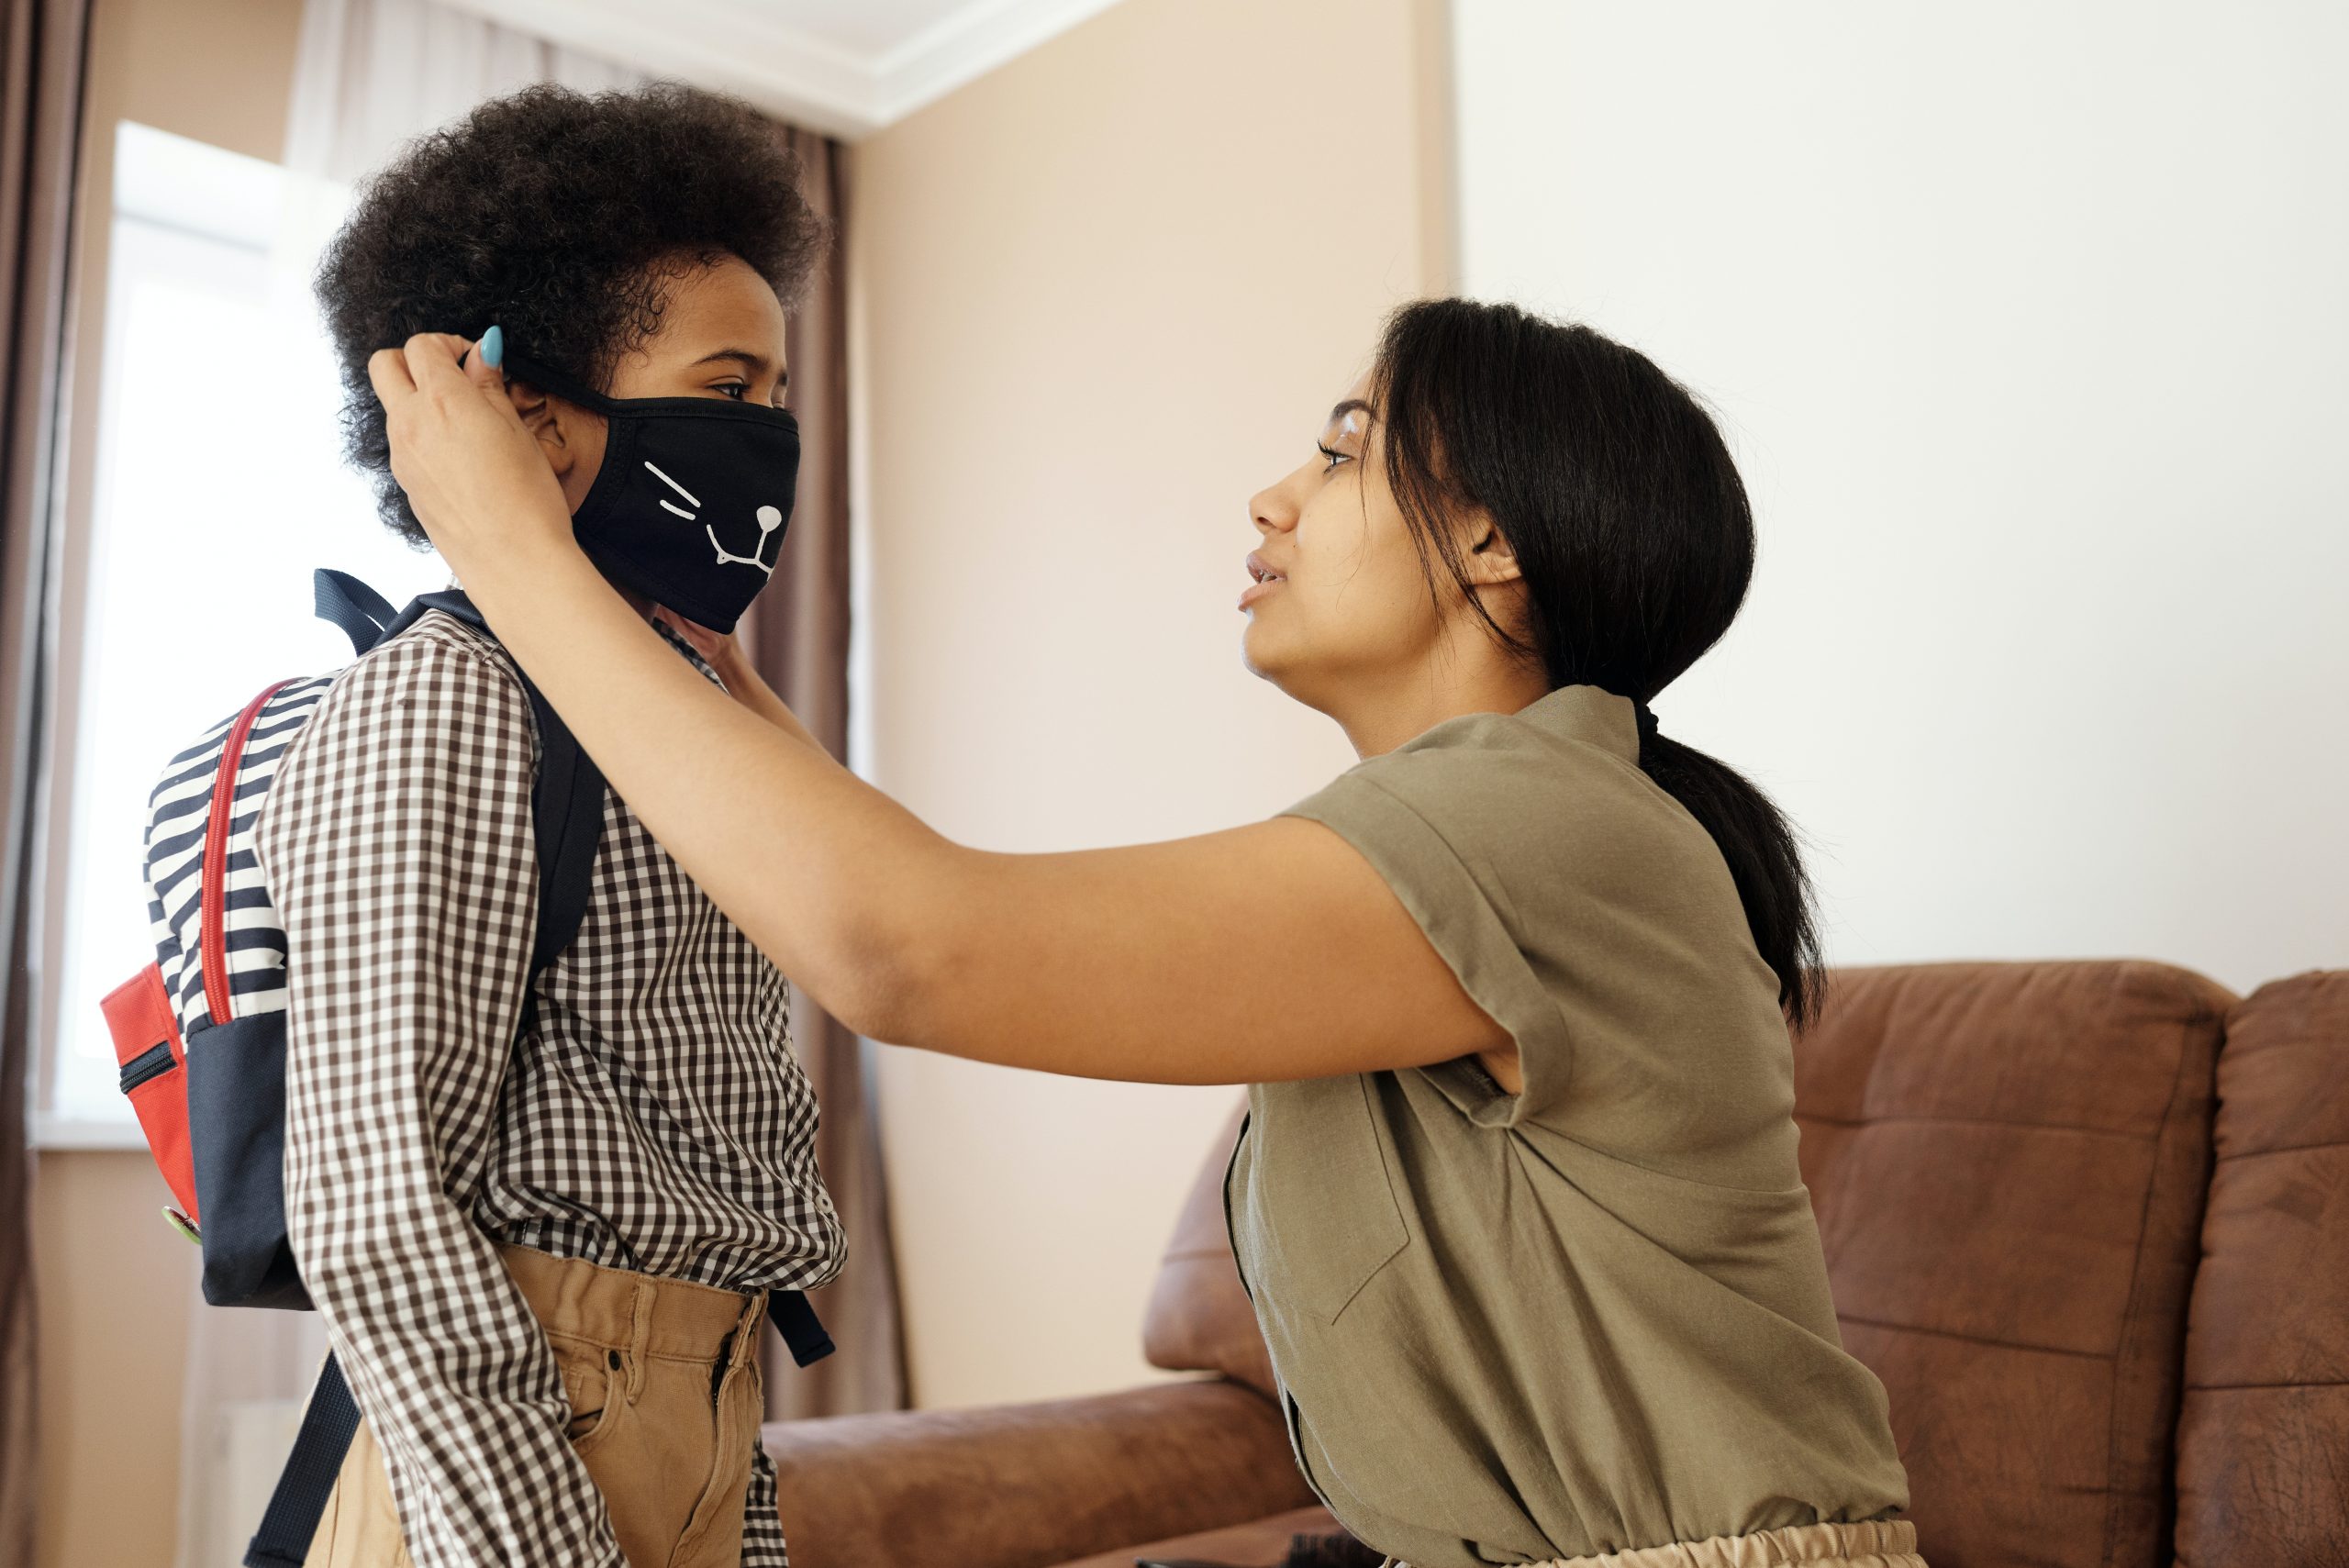 A mother adjusting her son's face mask just before he goes to school.